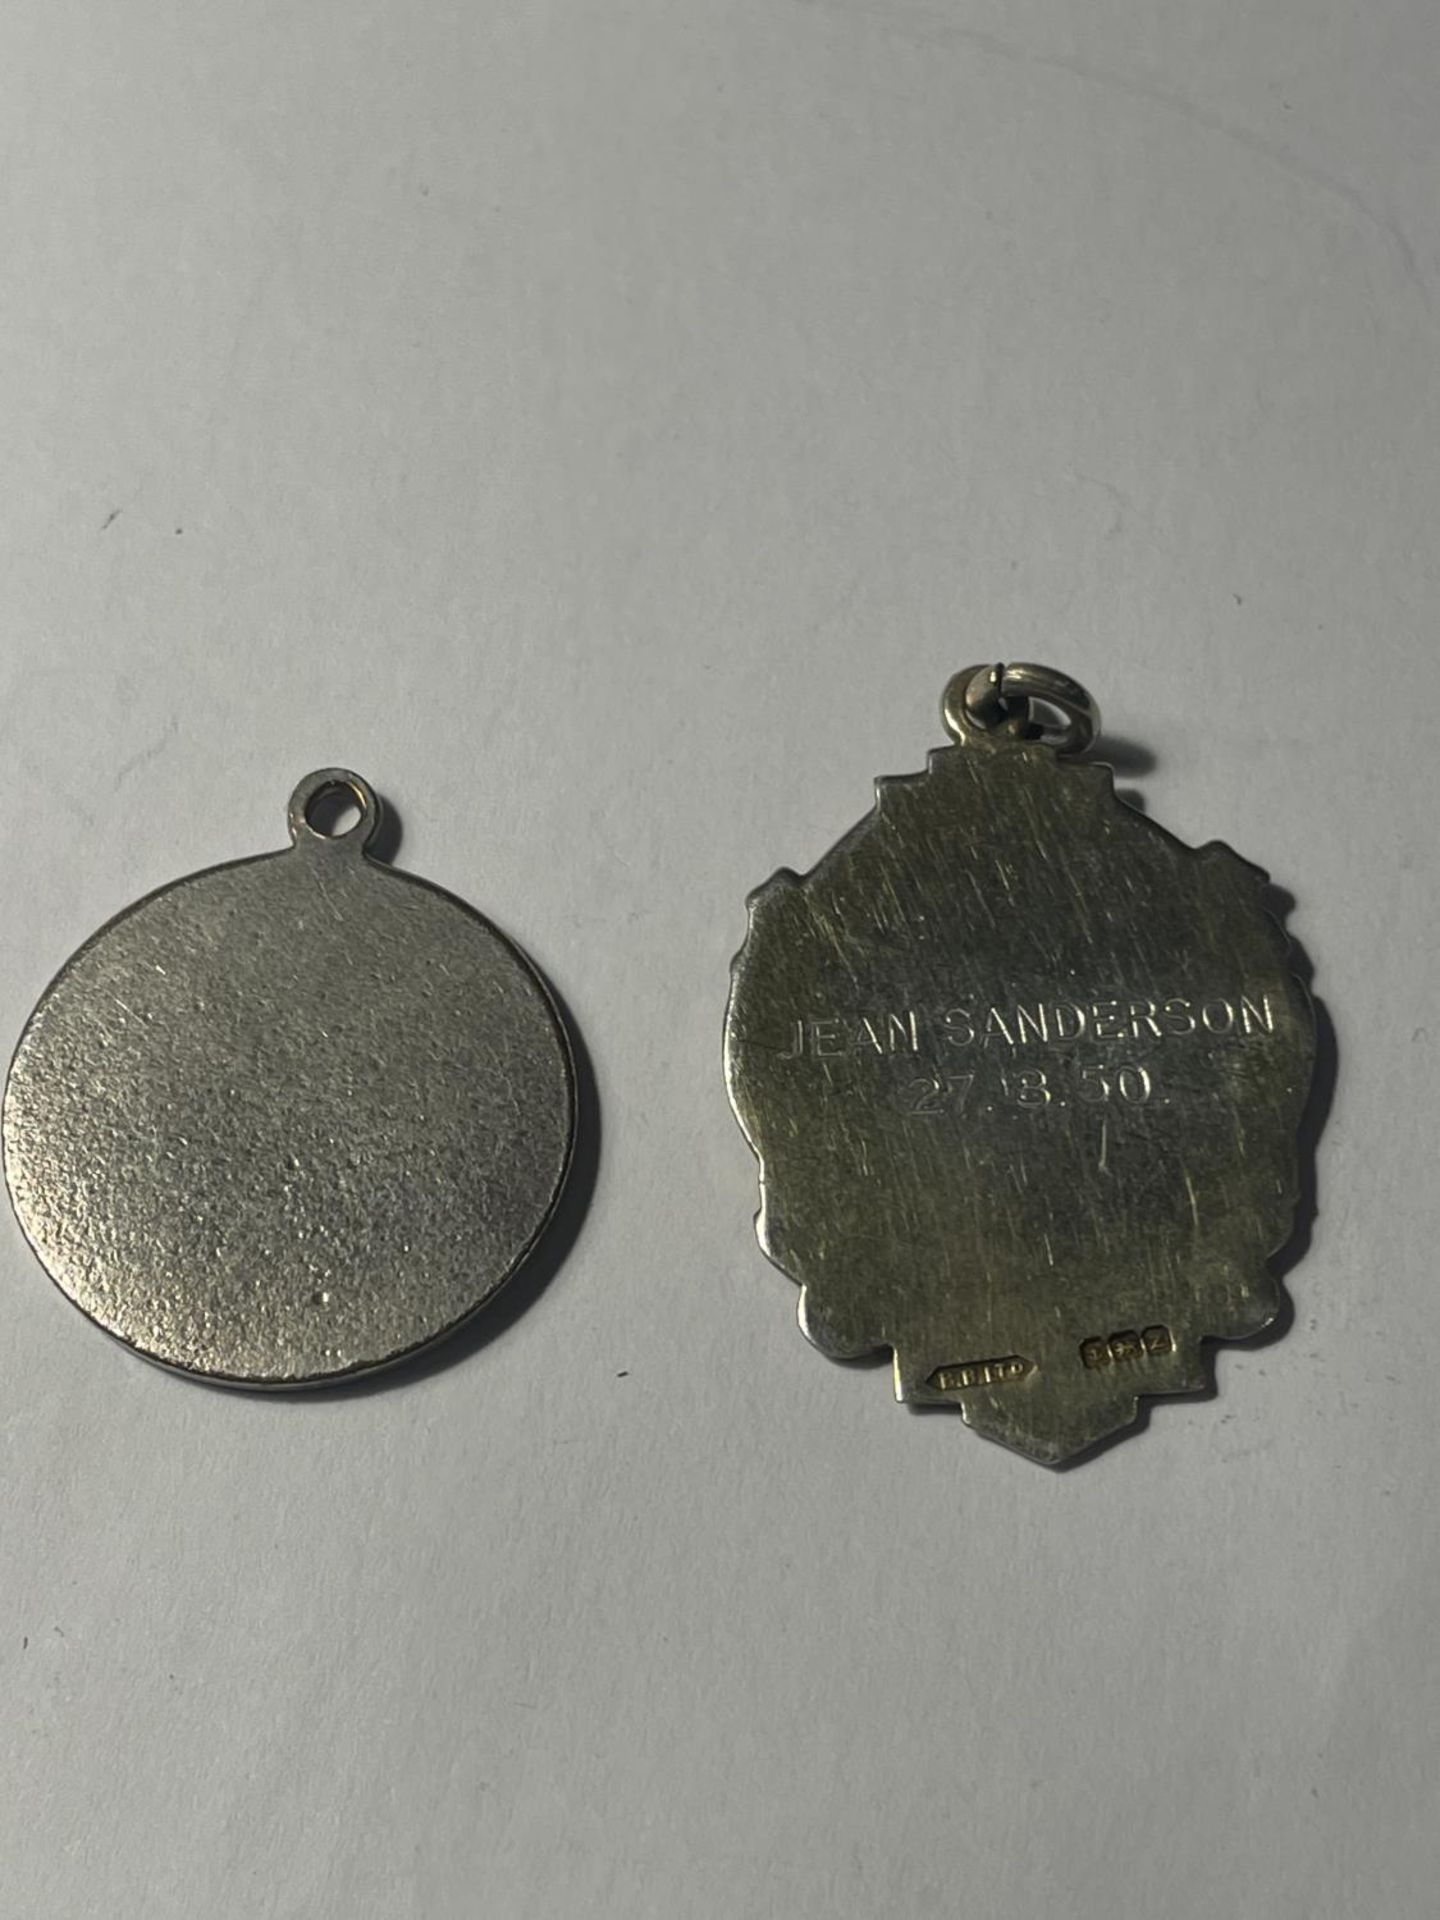 TWO SILVER WATCH CHAIN FOBS ONE HALLAMRKED BIRMINGHAM - Image 2 of 3